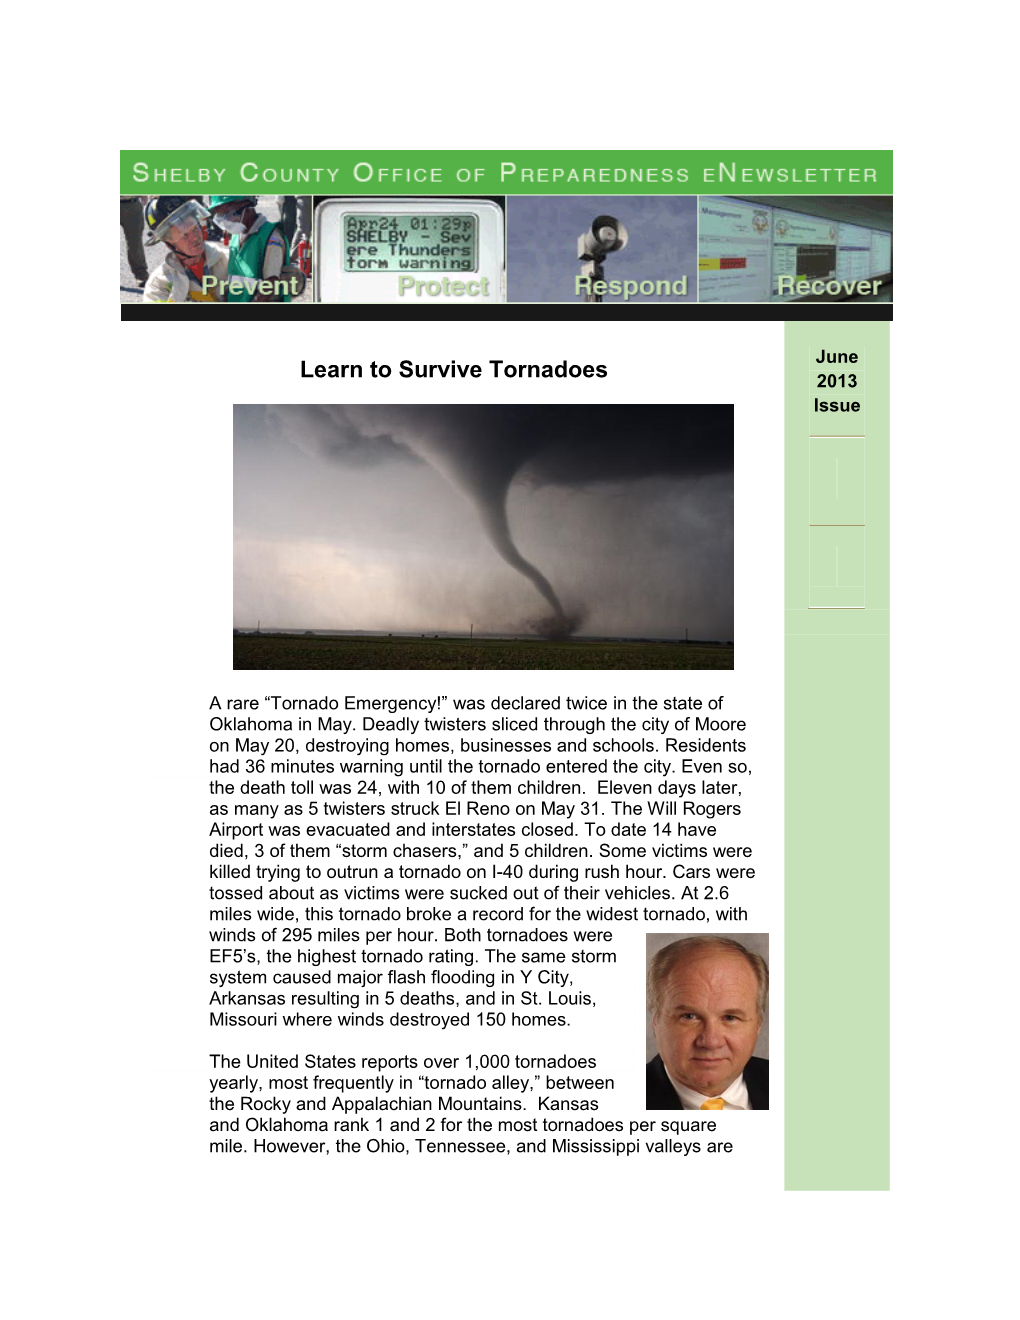 Learn to Survive Tornadoes 2013